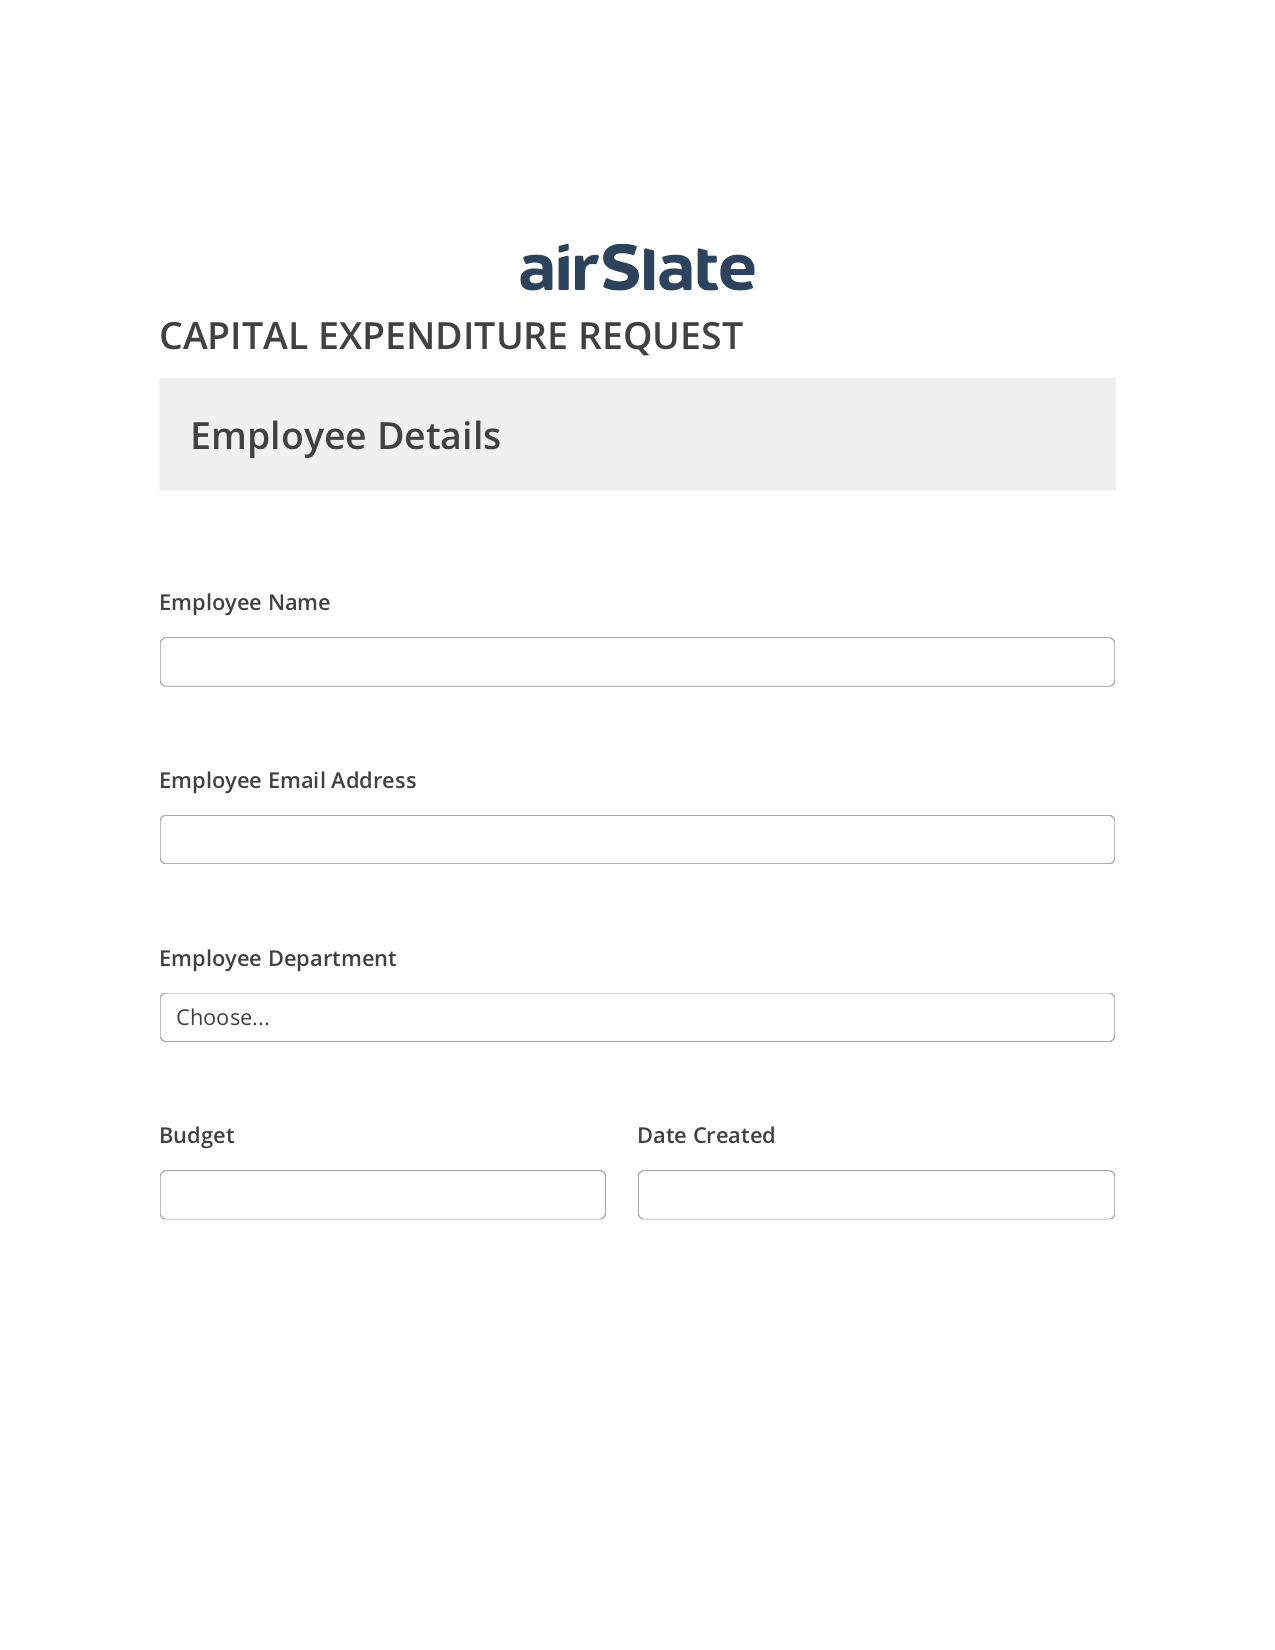 Capital Expenditure Request Approval Workflow System Bot - Slack Two-Way Binding Bot, SendGrid send Campaign bot, Export to NetSuite Bot